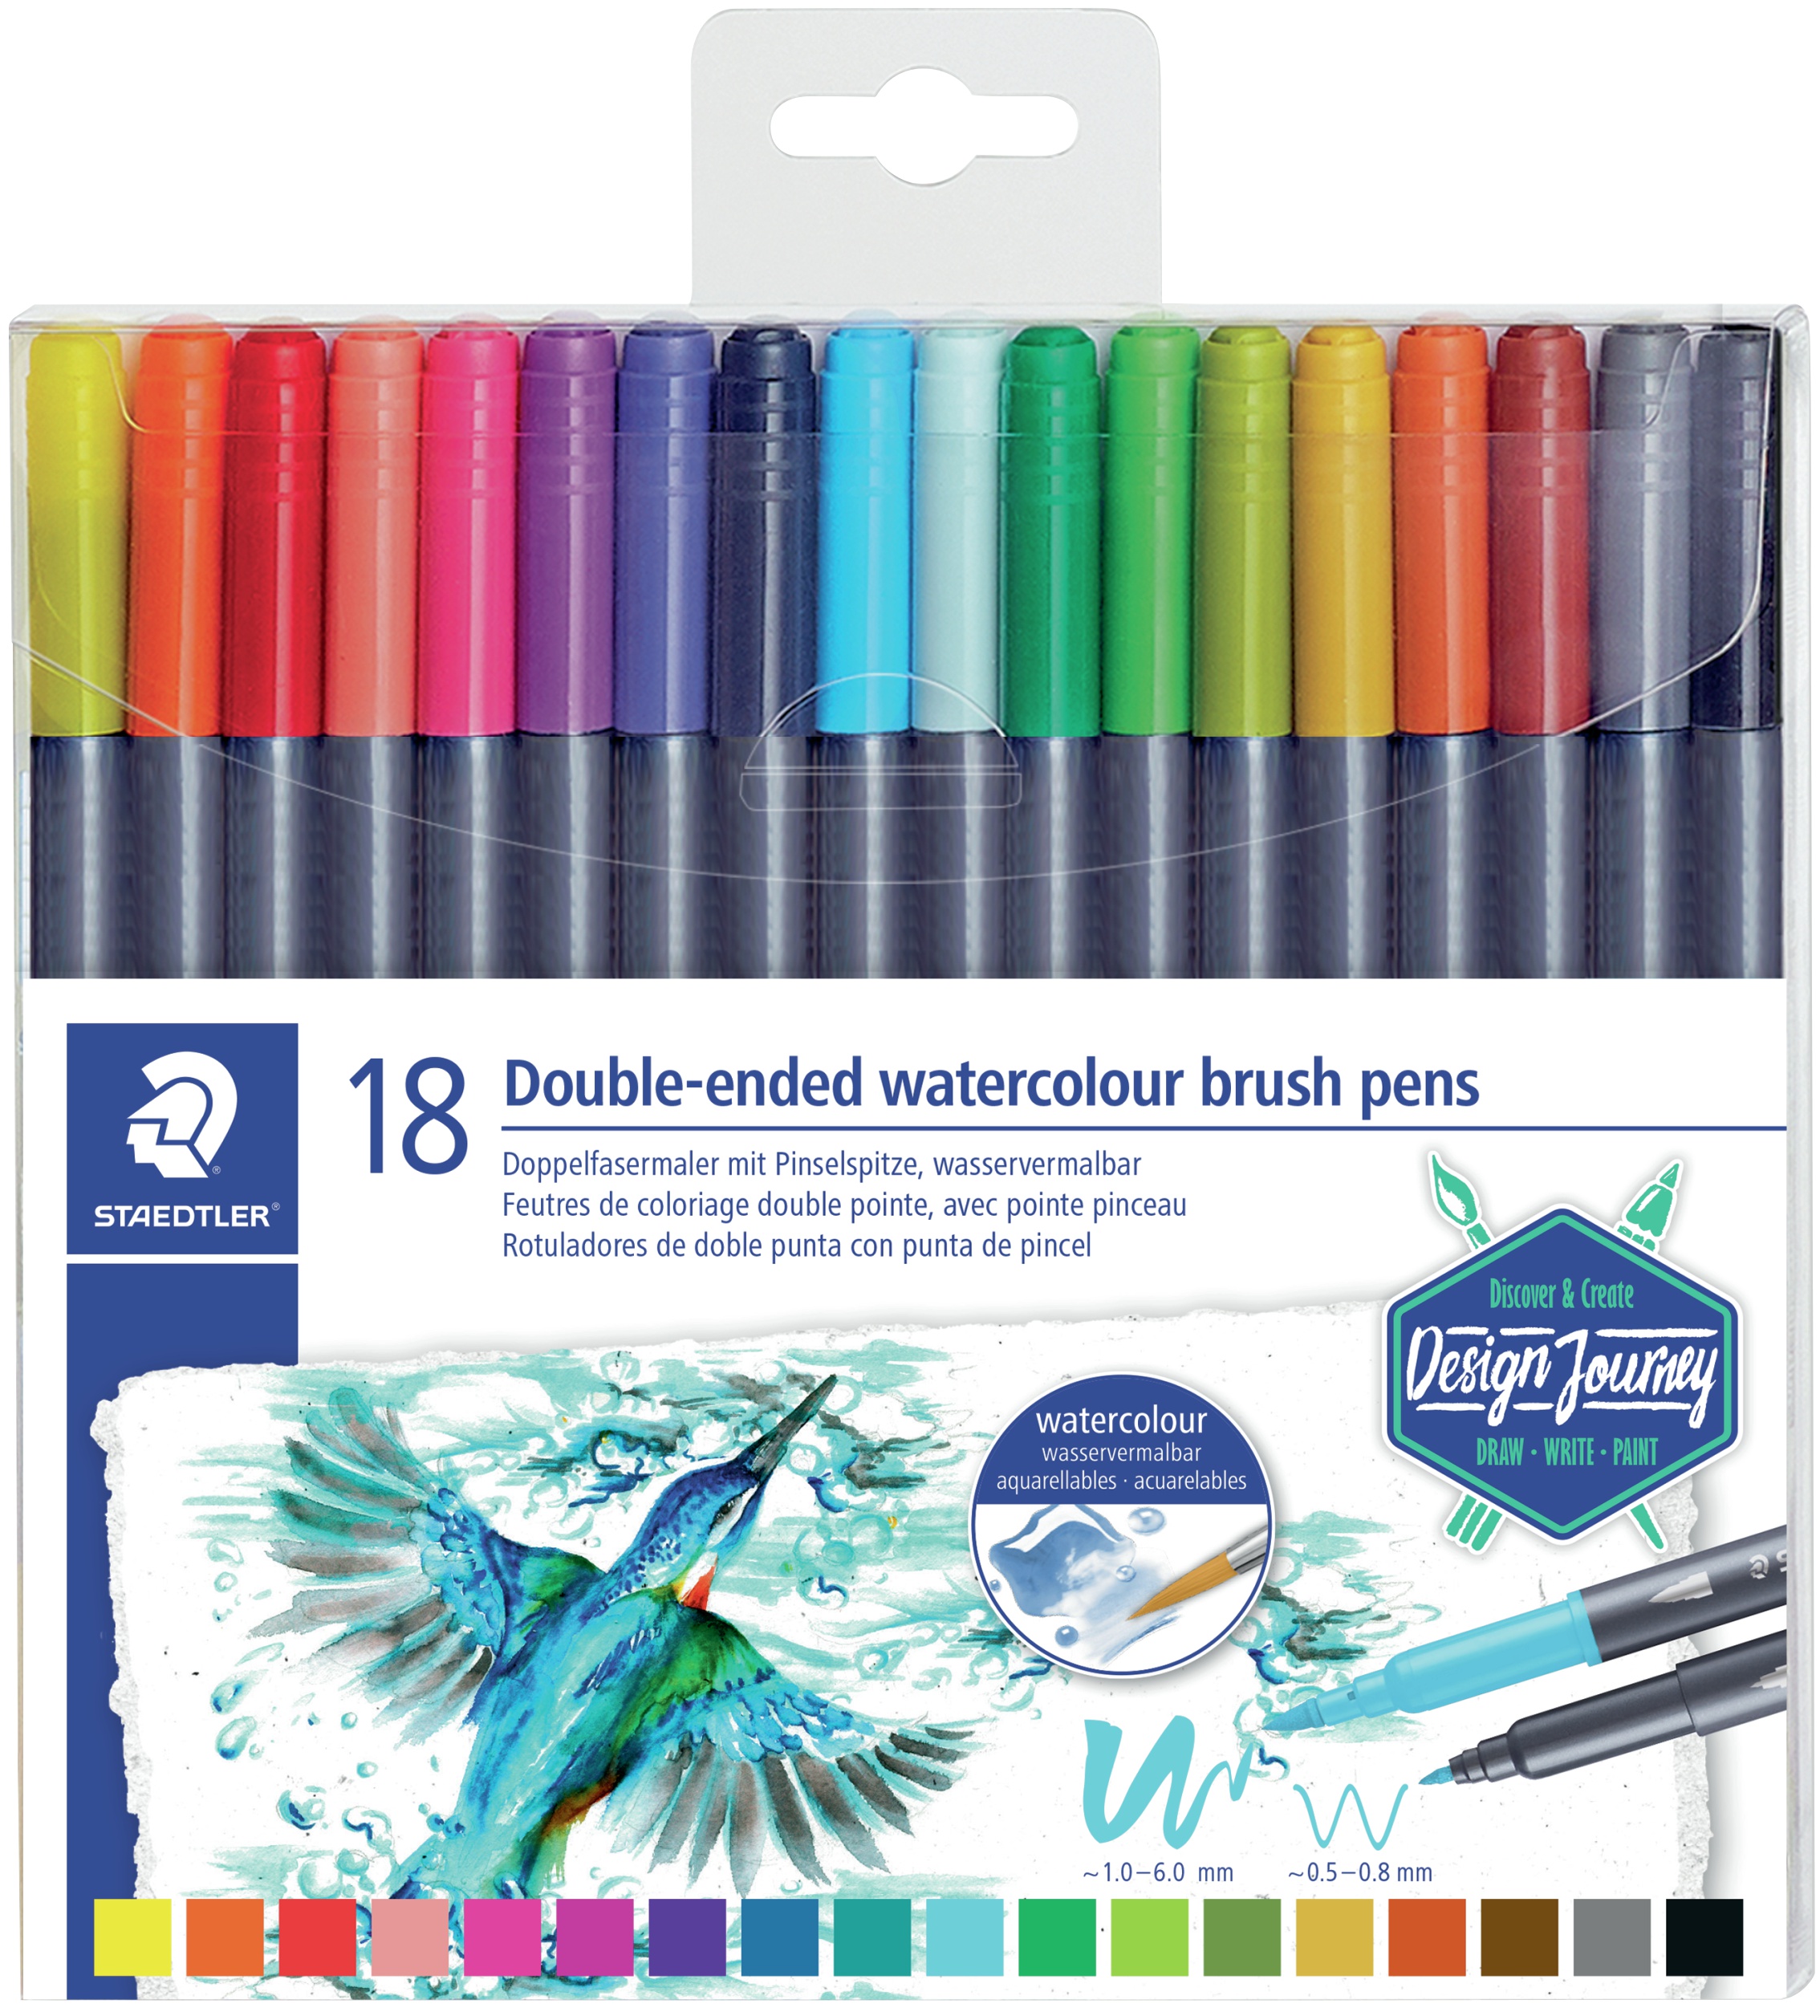 marsgraphic duo double ended watercolor brush markers